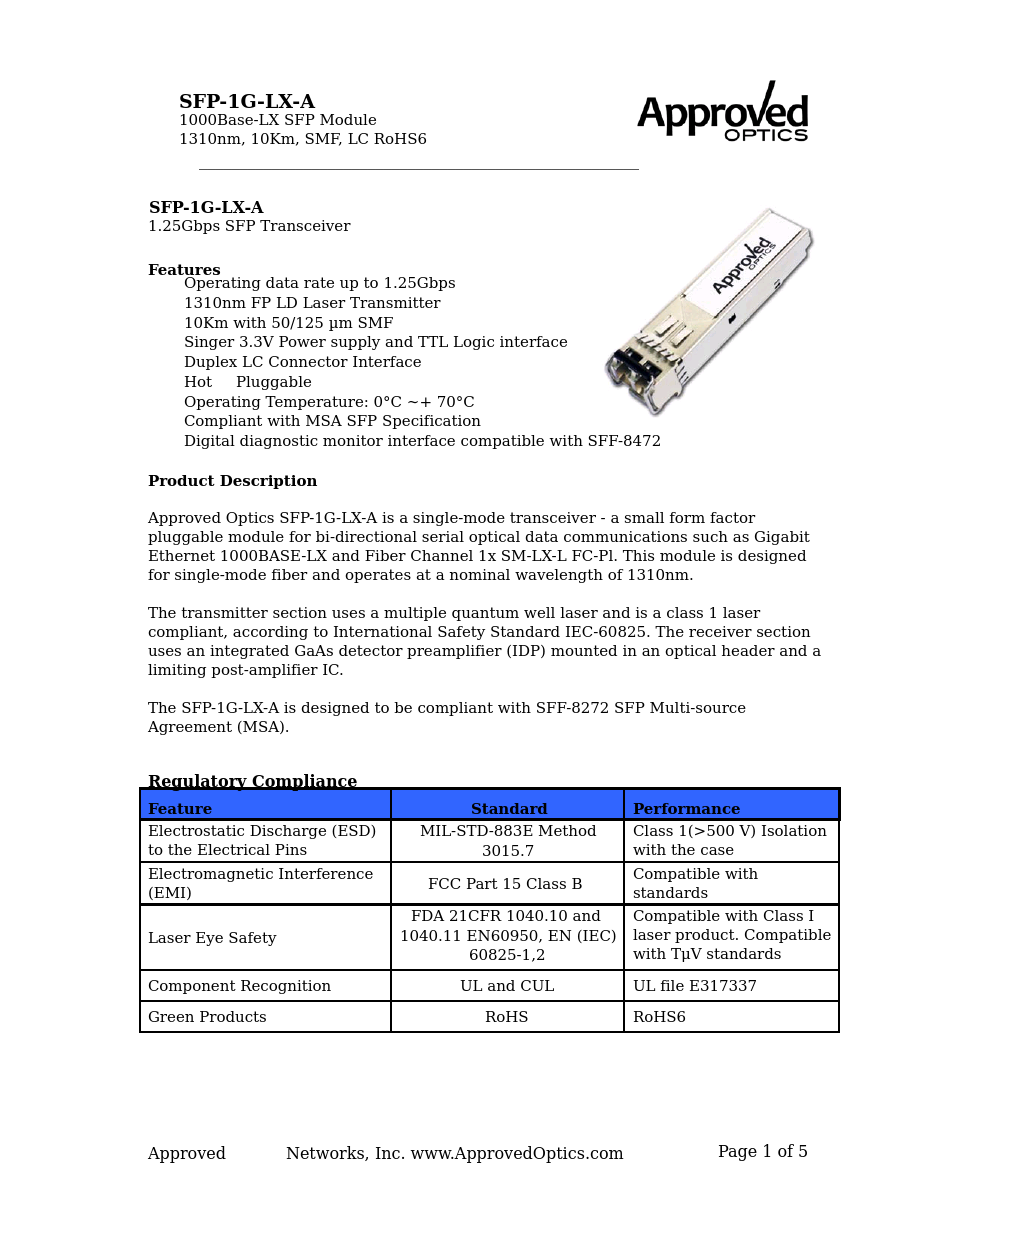 Approved ARISTA SFP-1G-LX